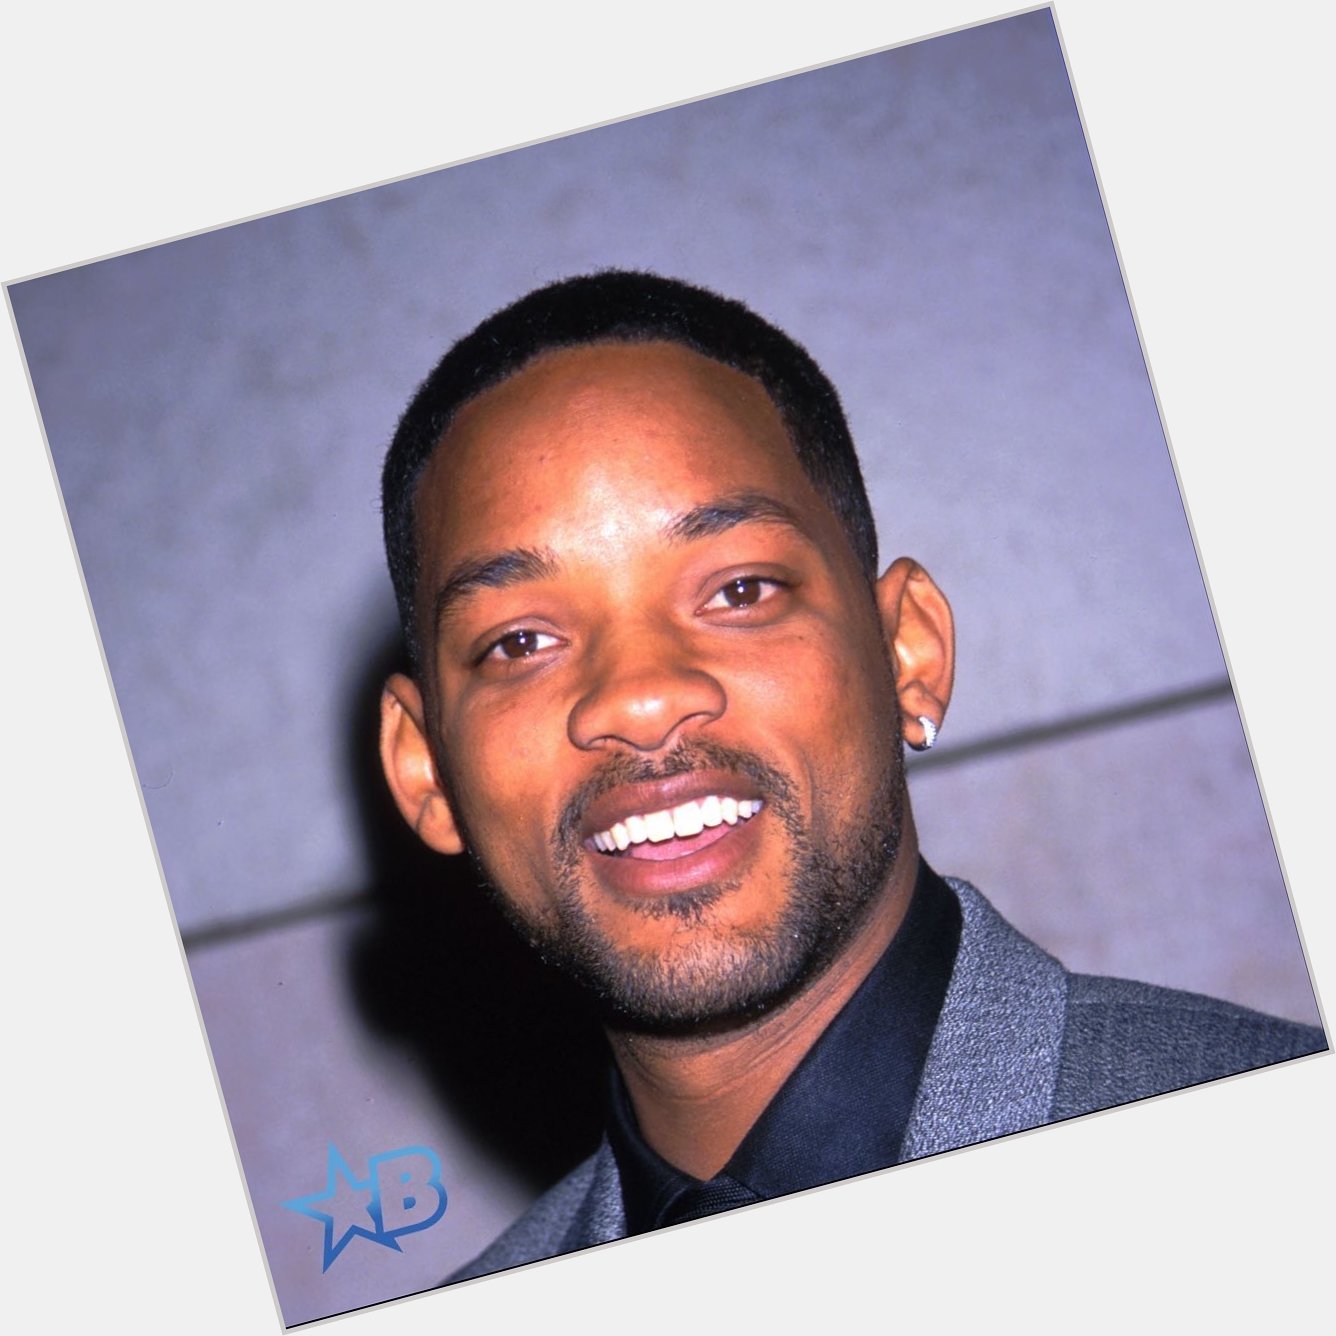 Join us in wishing Will Smith a happy 54th birthday!   .
.
.   : Getty 